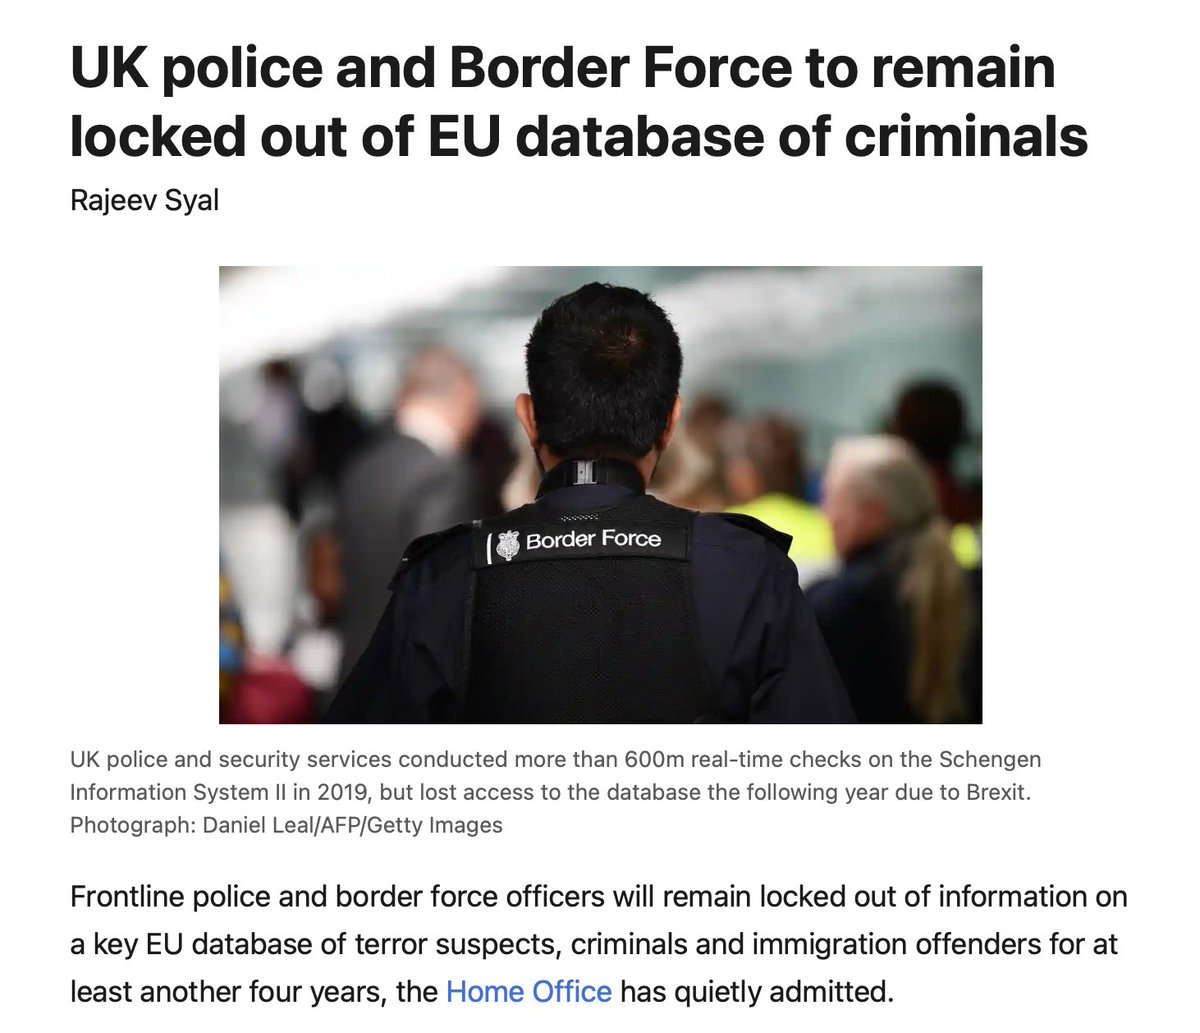 @certual @Jenx123_ Brexit made it easier for foreign criminals to enter the UK unchecked. Cuts to Border Force & the Police have made a bad situation far worse.
Still think Brexit was a good idea?
#ToryBrexitBrokeBritain